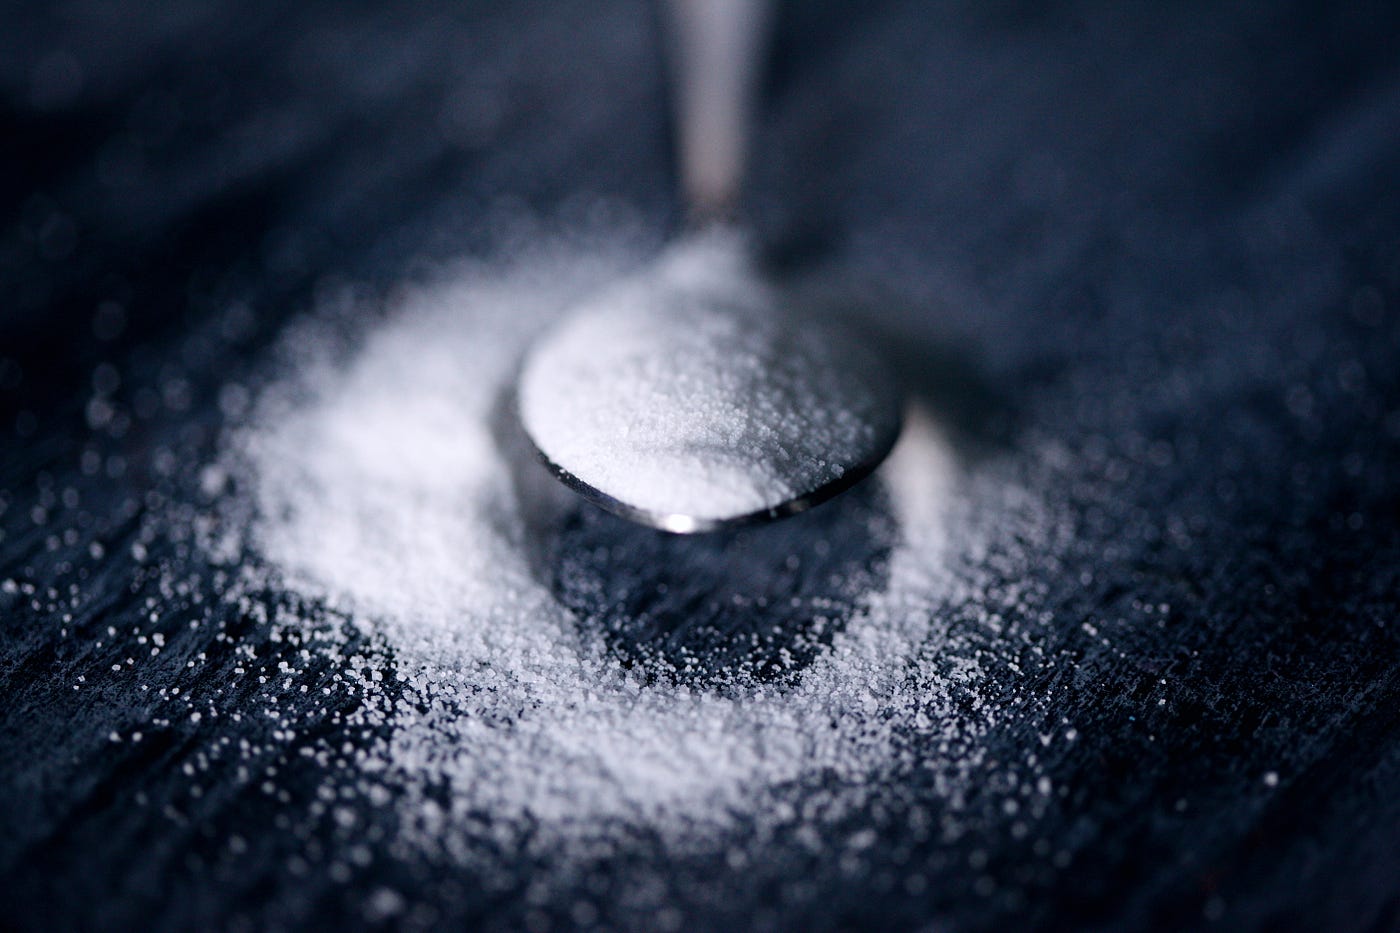 A photo of a spoon with some sugar. Beneath the spoon, on the black tabletop, is more sugar. Eating more refined carbohydrates (or other things with lots of sugar) is associated with higher triglyceride levels.